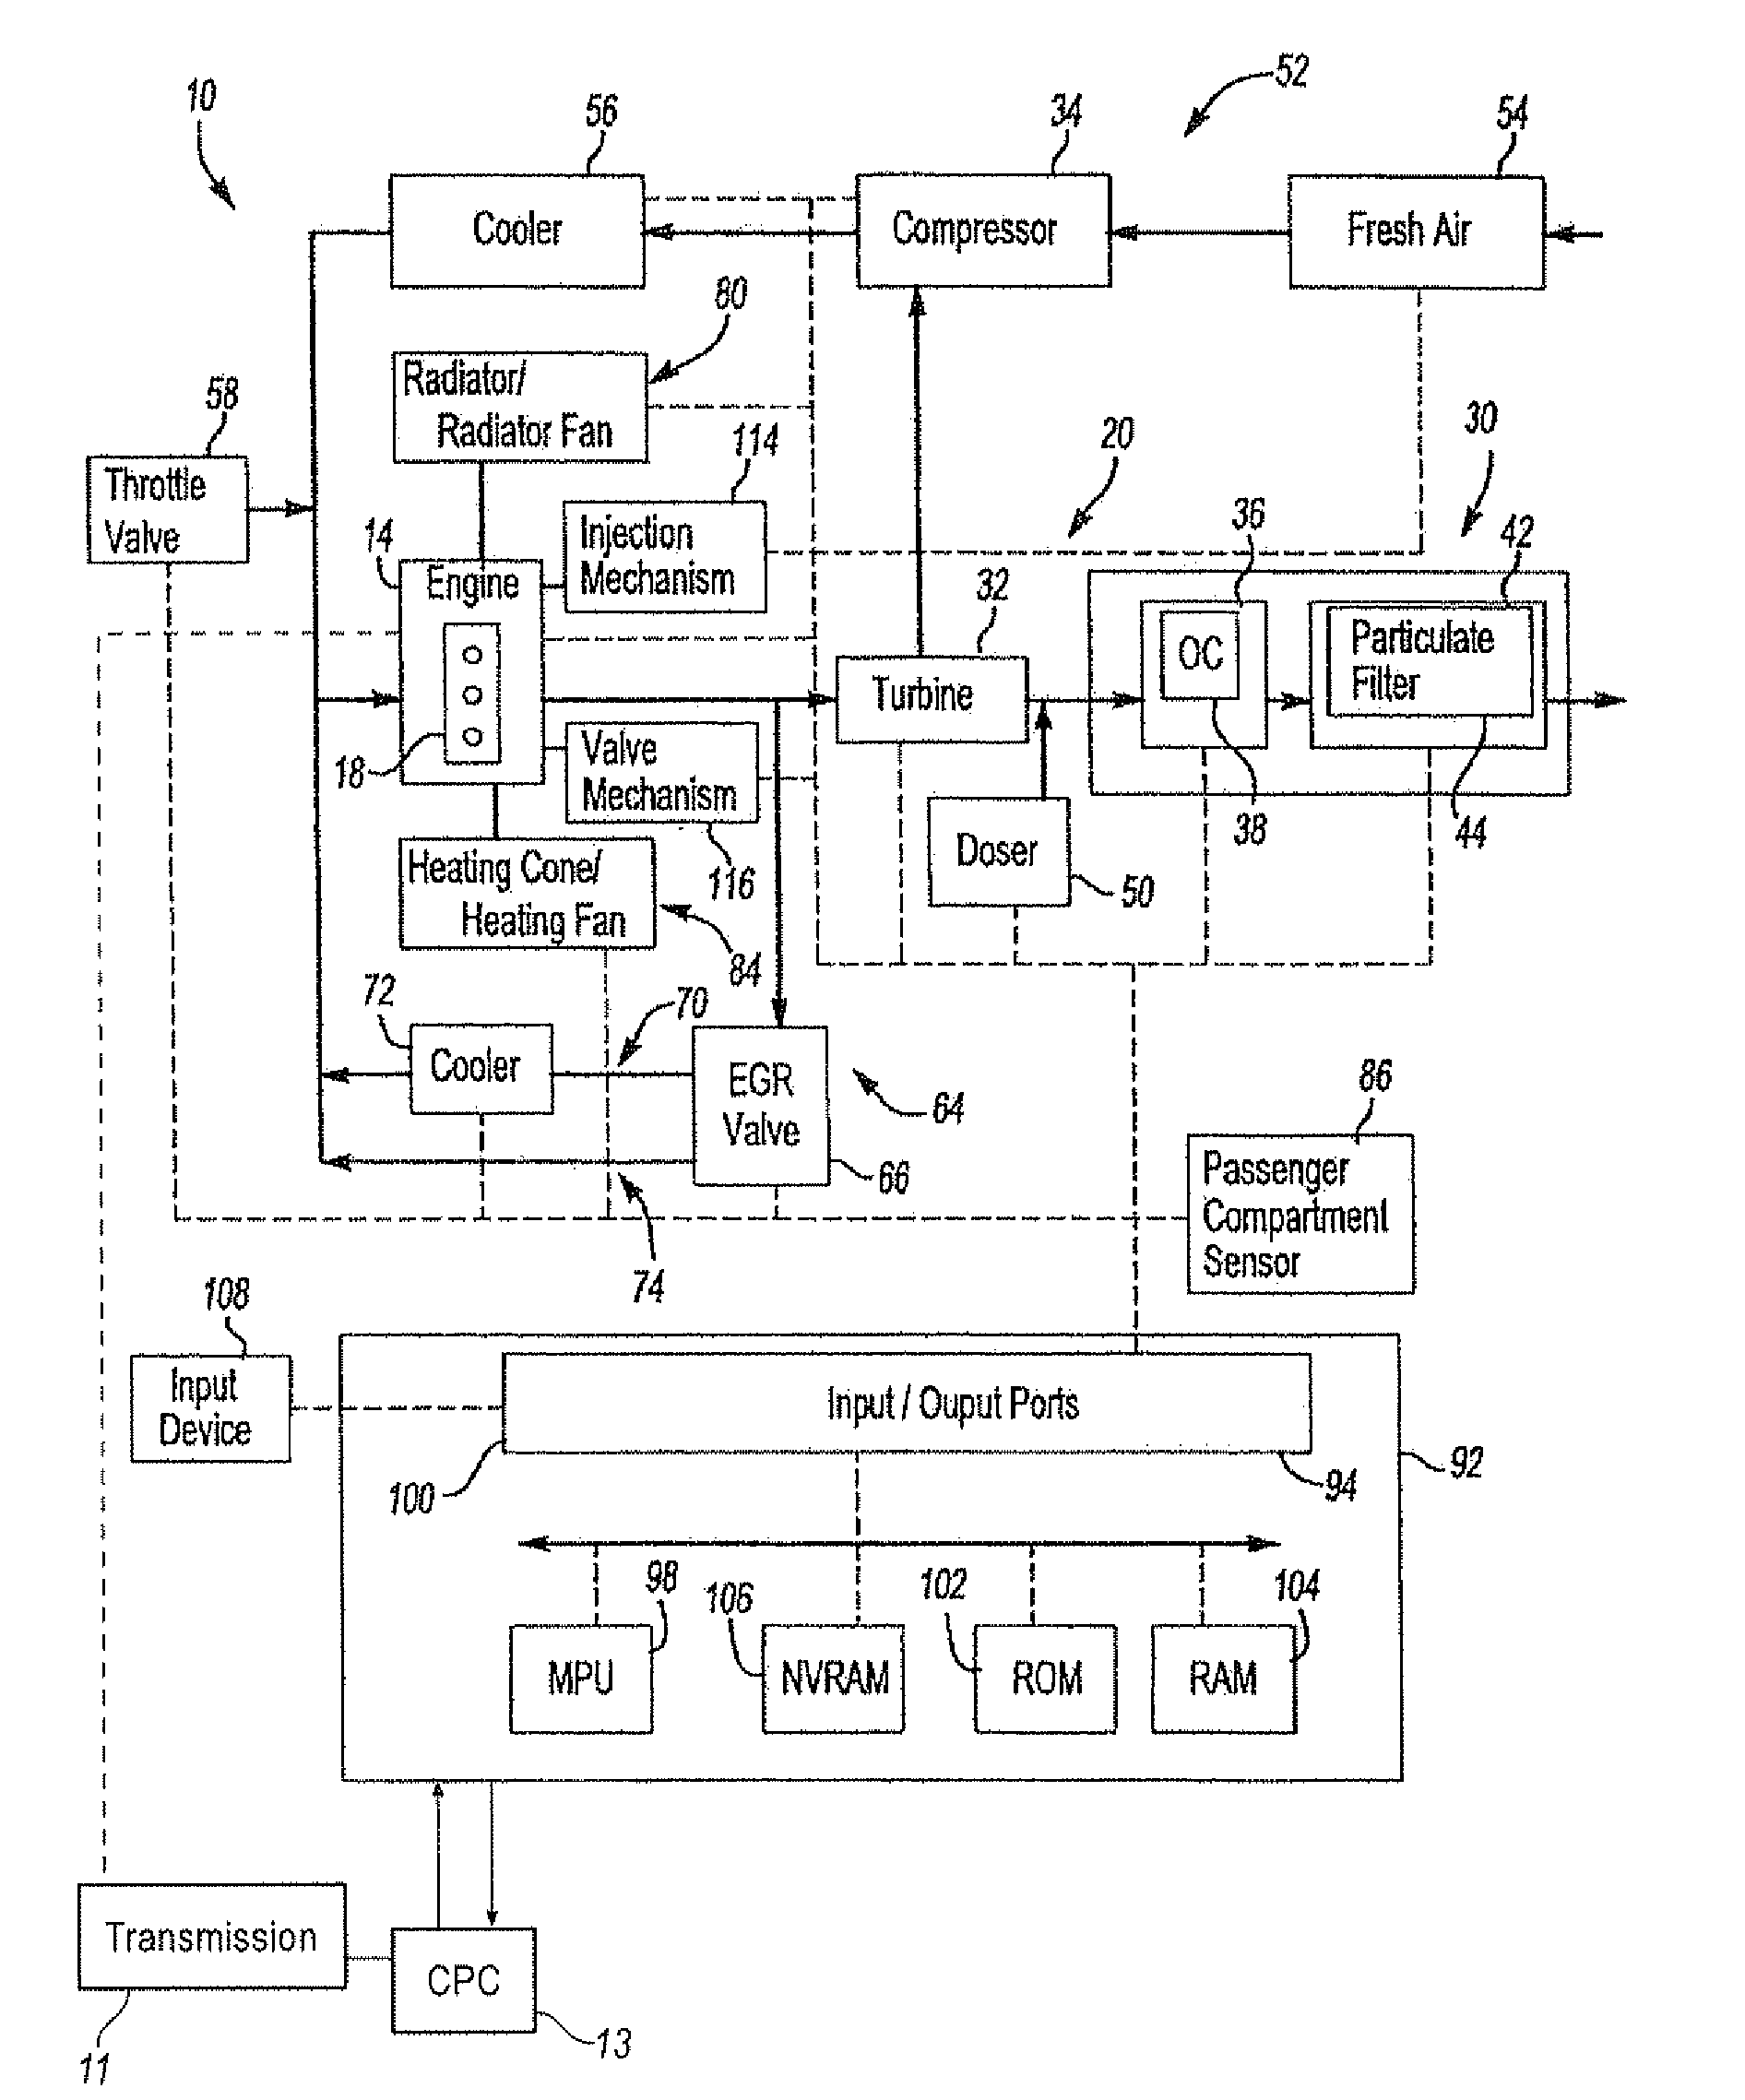 Method of verifying component functionality on EGR and air systems